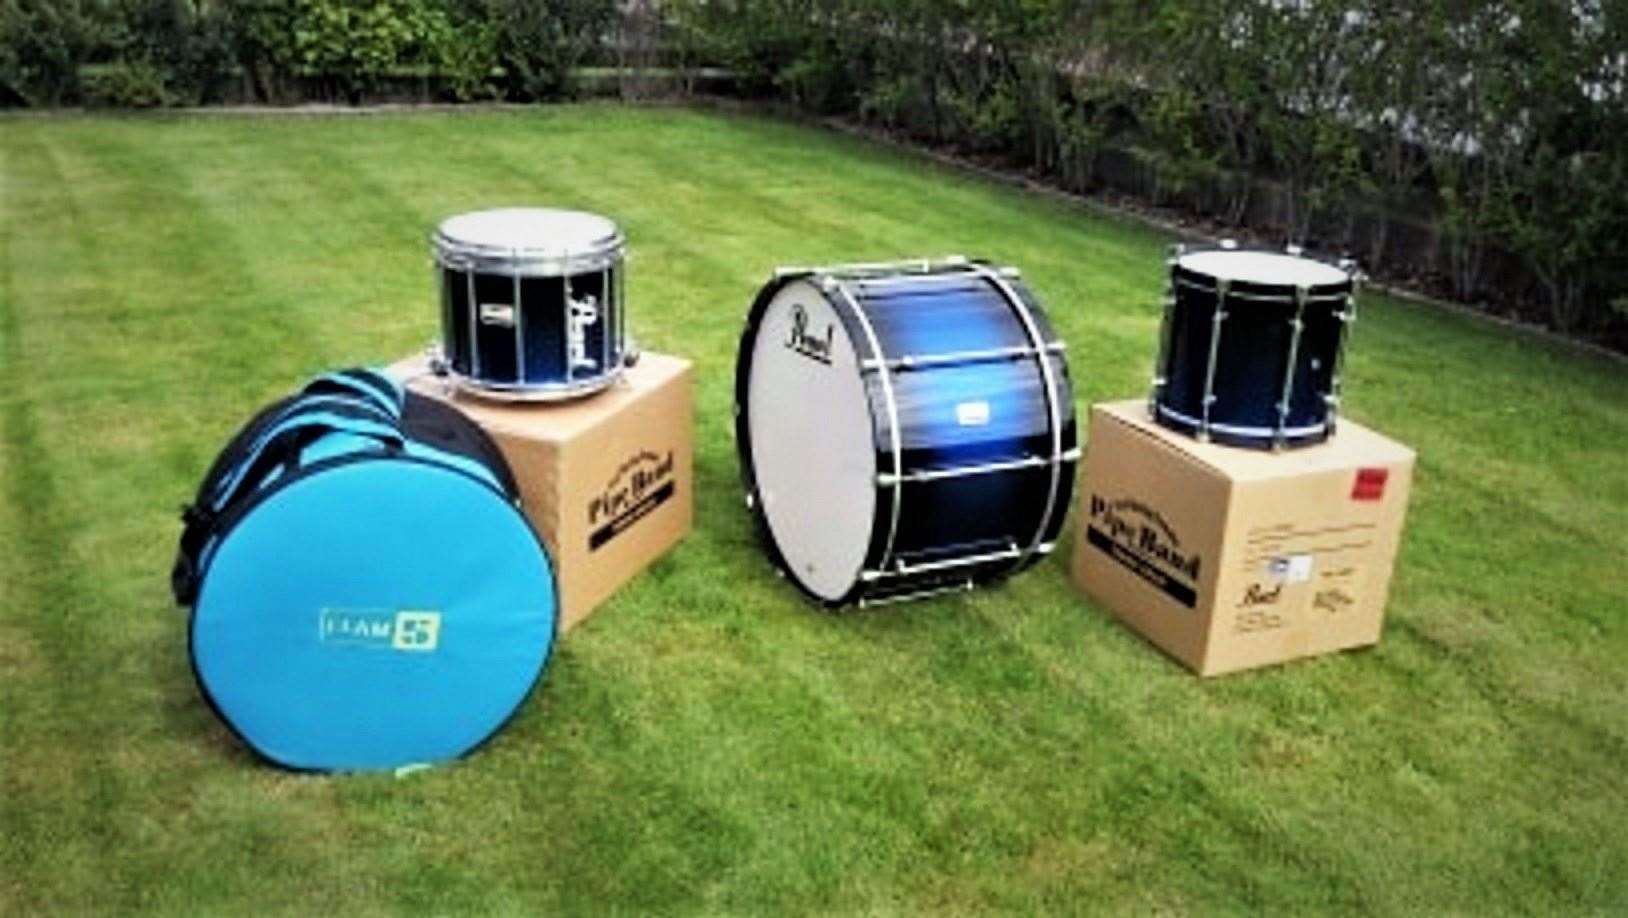 New drums recently purchased for the band thanks to a funding initiative.